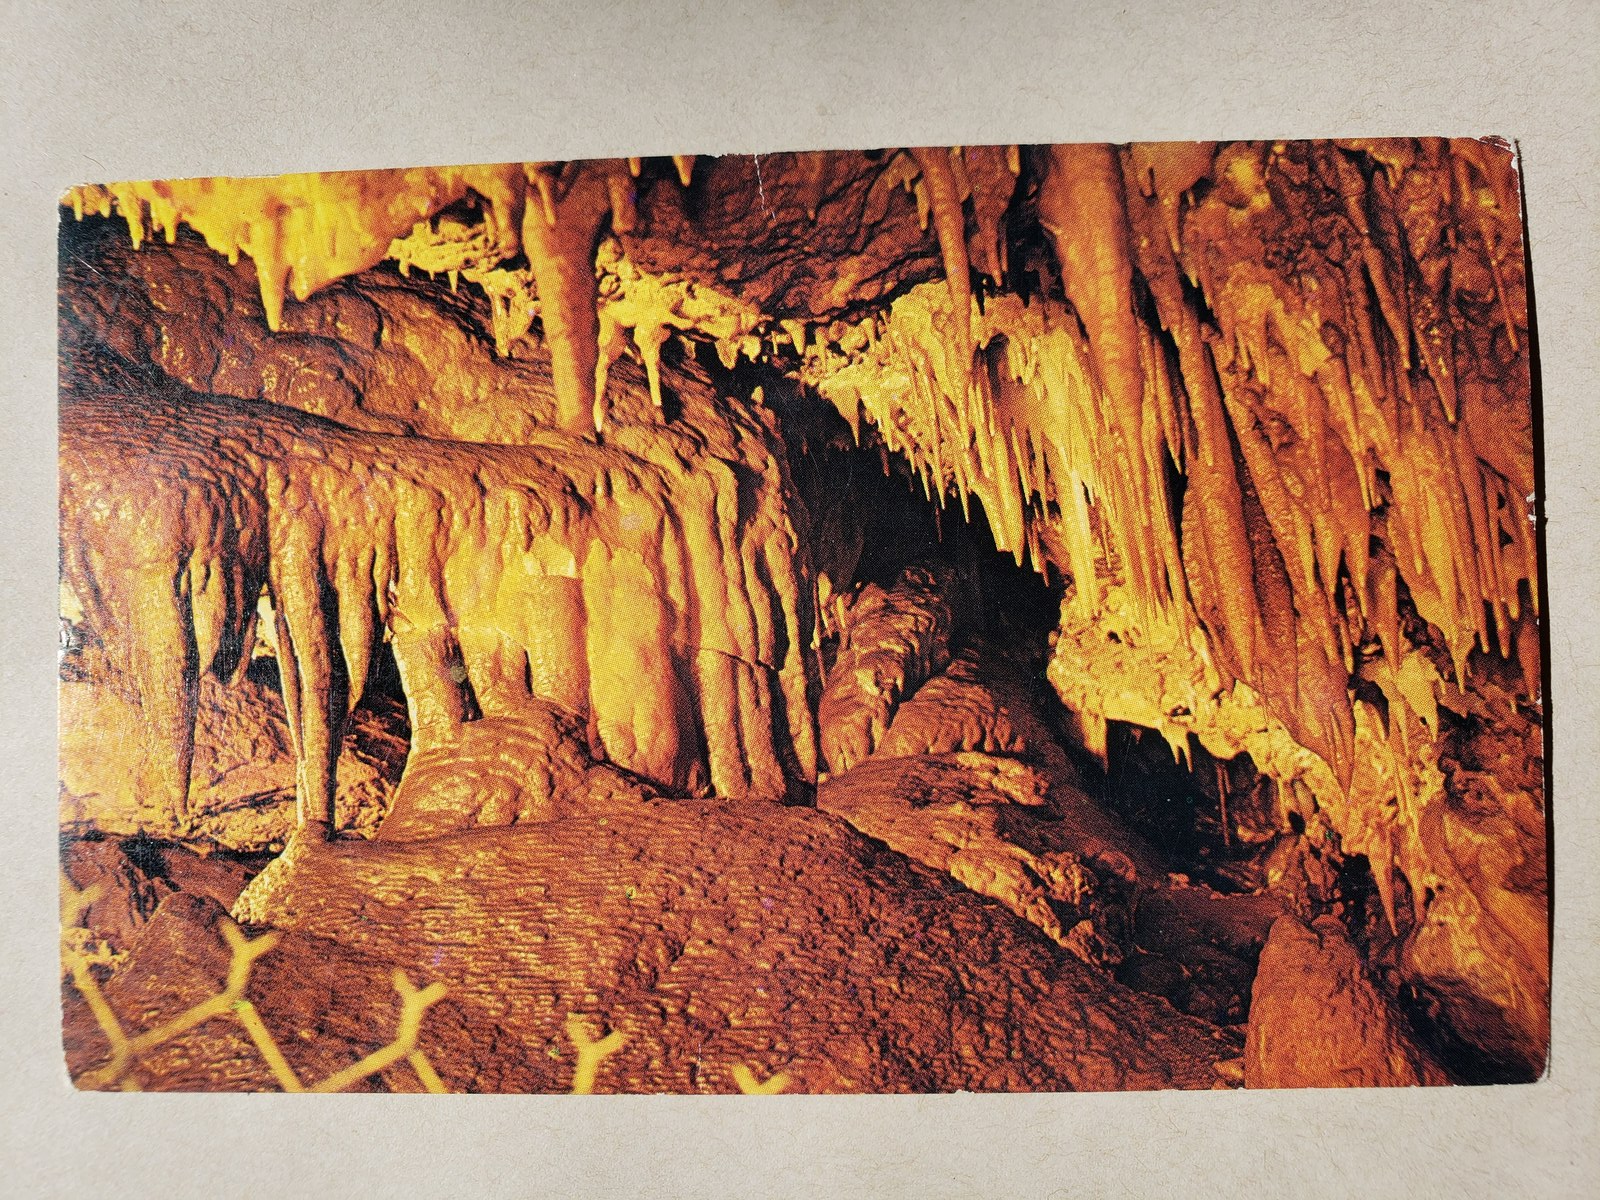 Vintage Postcard - Rushmore Caves The Arrowhead Room - Colourpicture Publishers - $15.00